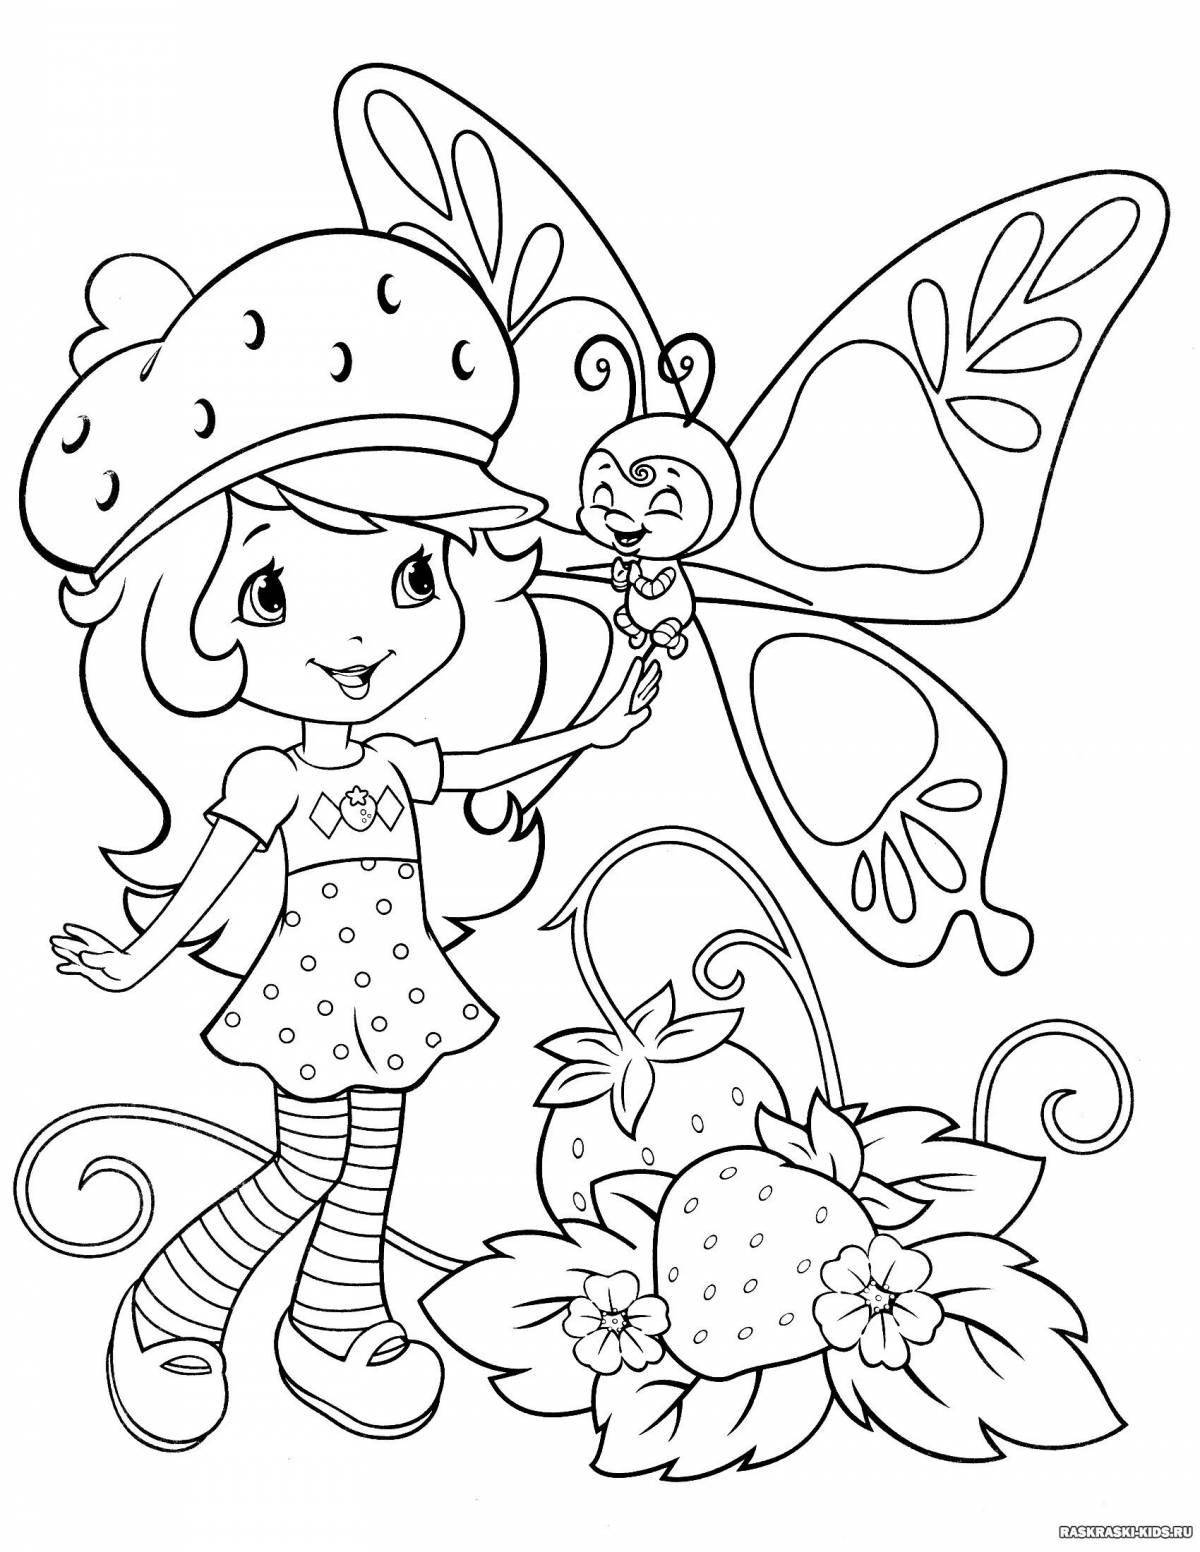 Fashionable coloring book for girls